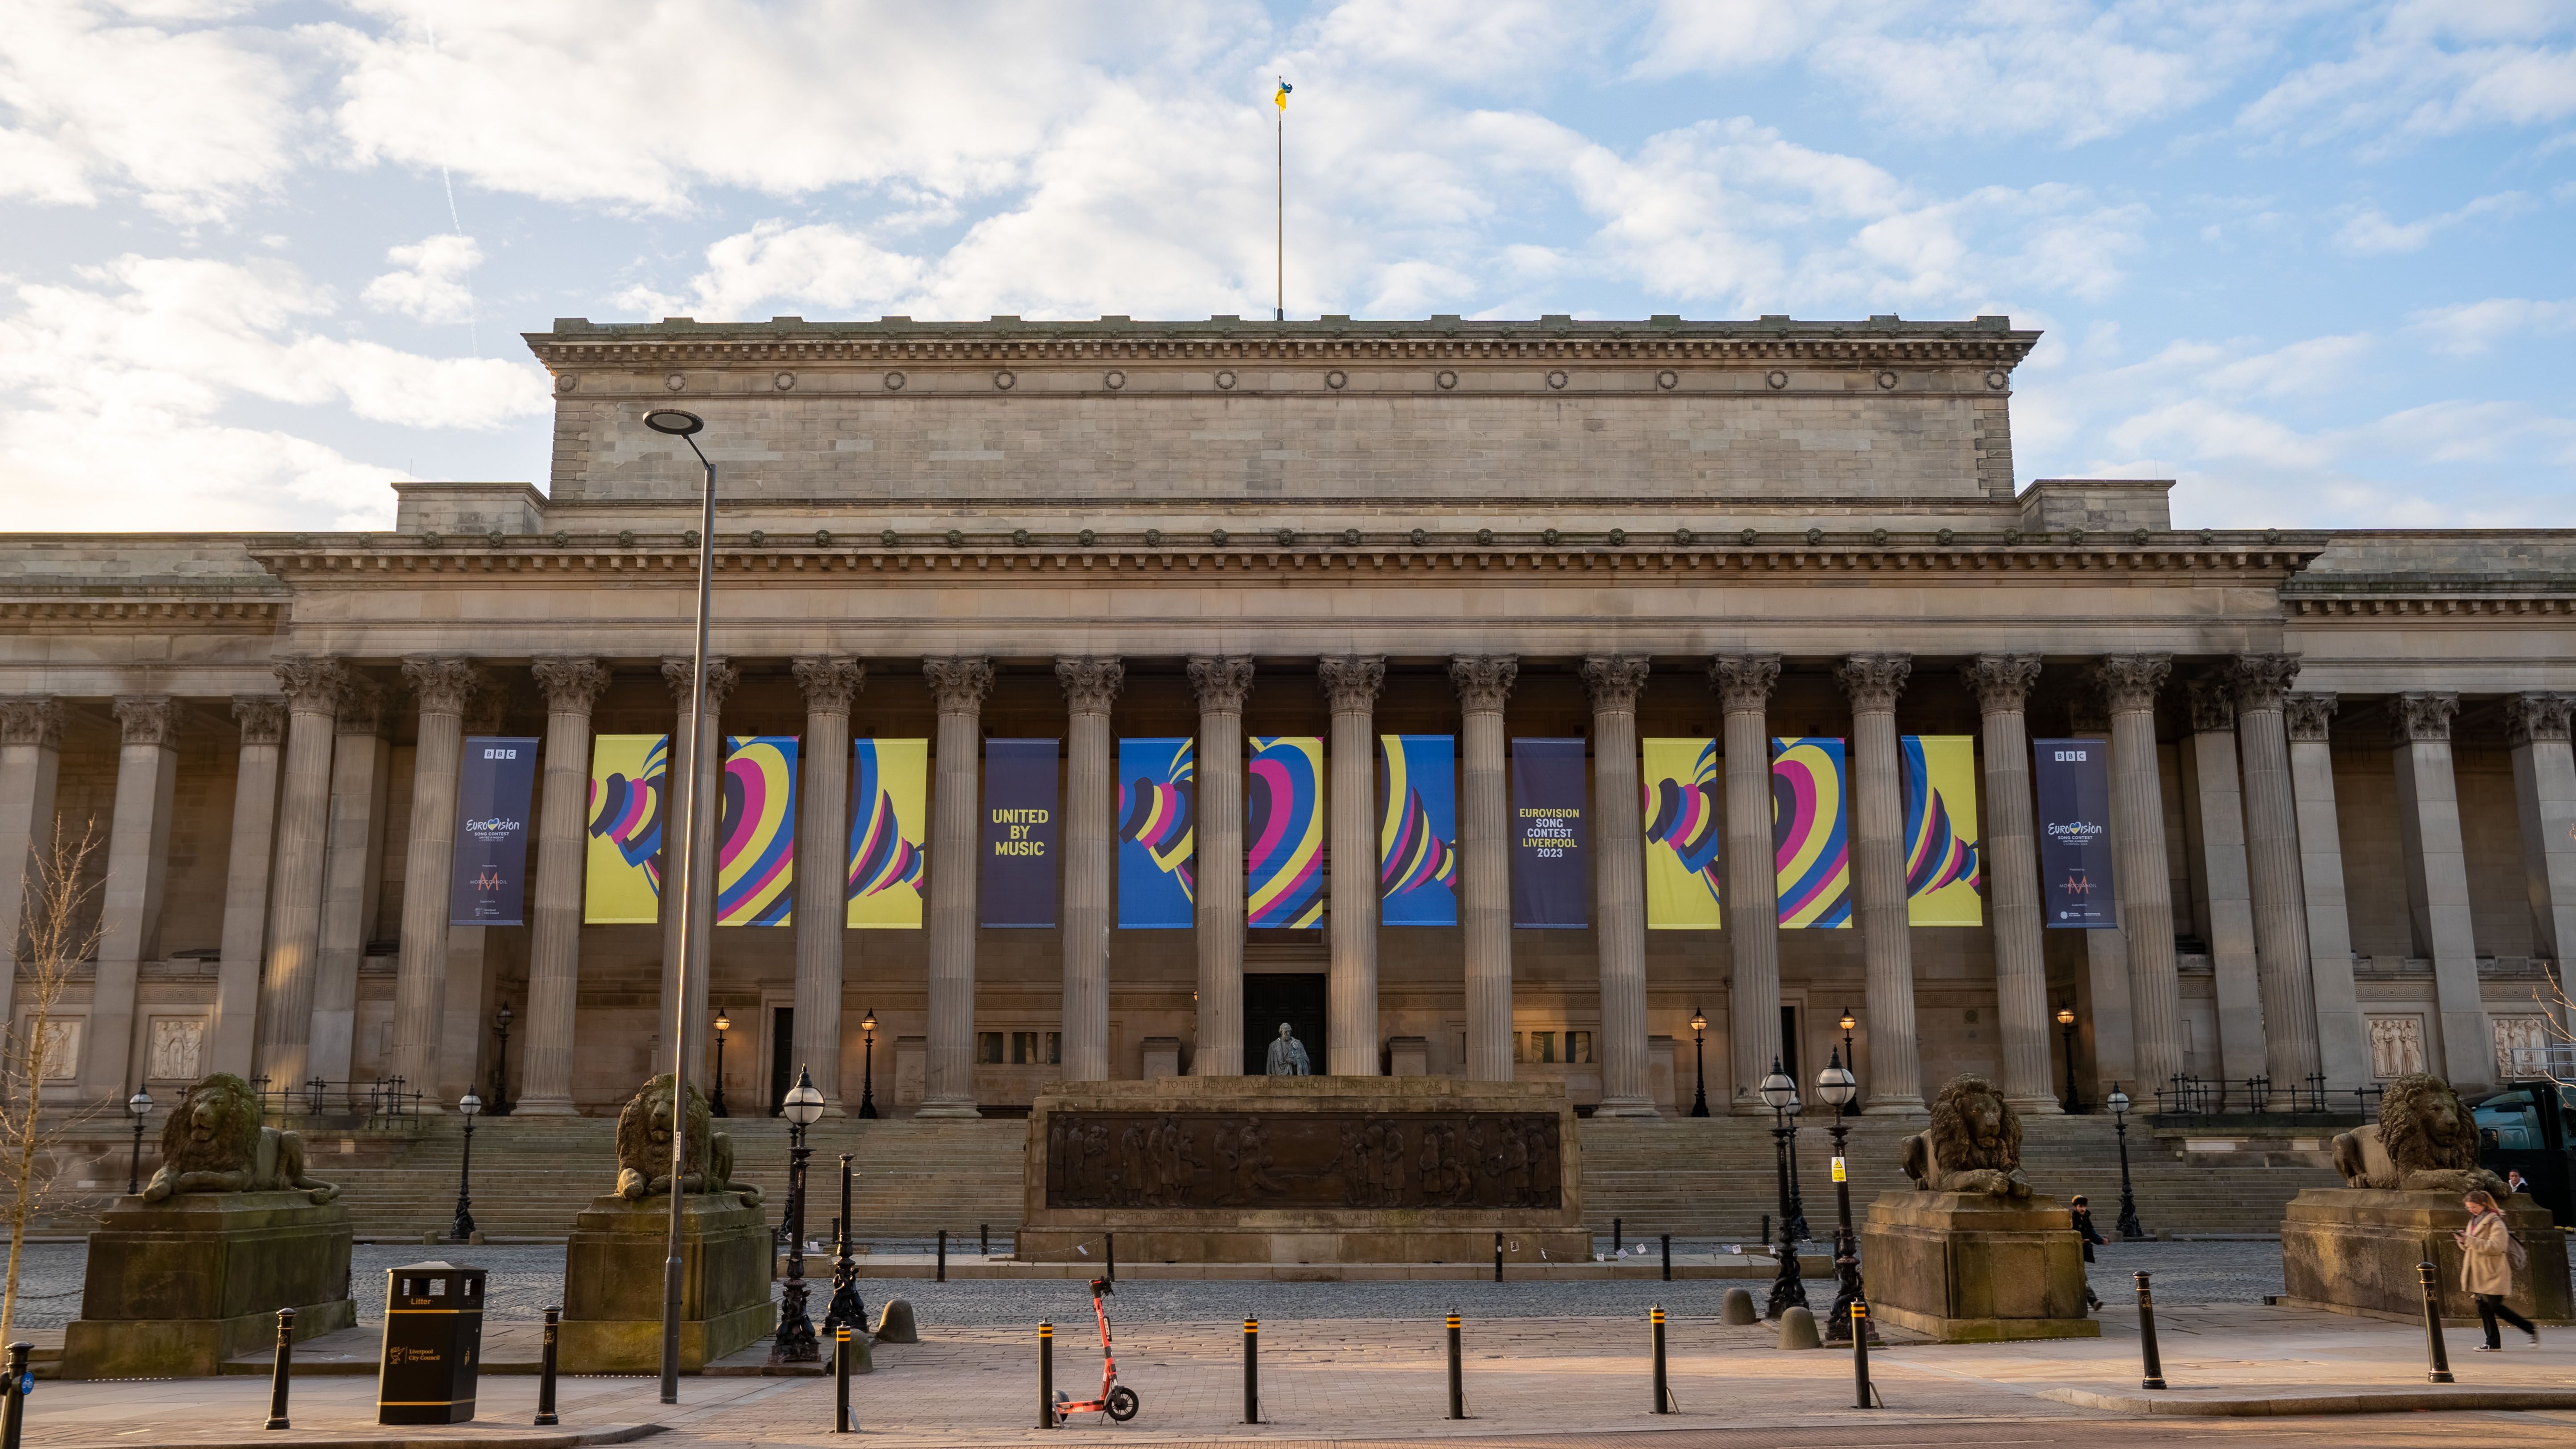 In Liverpool, the iconic St George’s Hall and the Liverpool sign at Liverpool ONE will be dressed in the brand this week before it’s rolled out wider across the city in April. (BBC/James Stack)